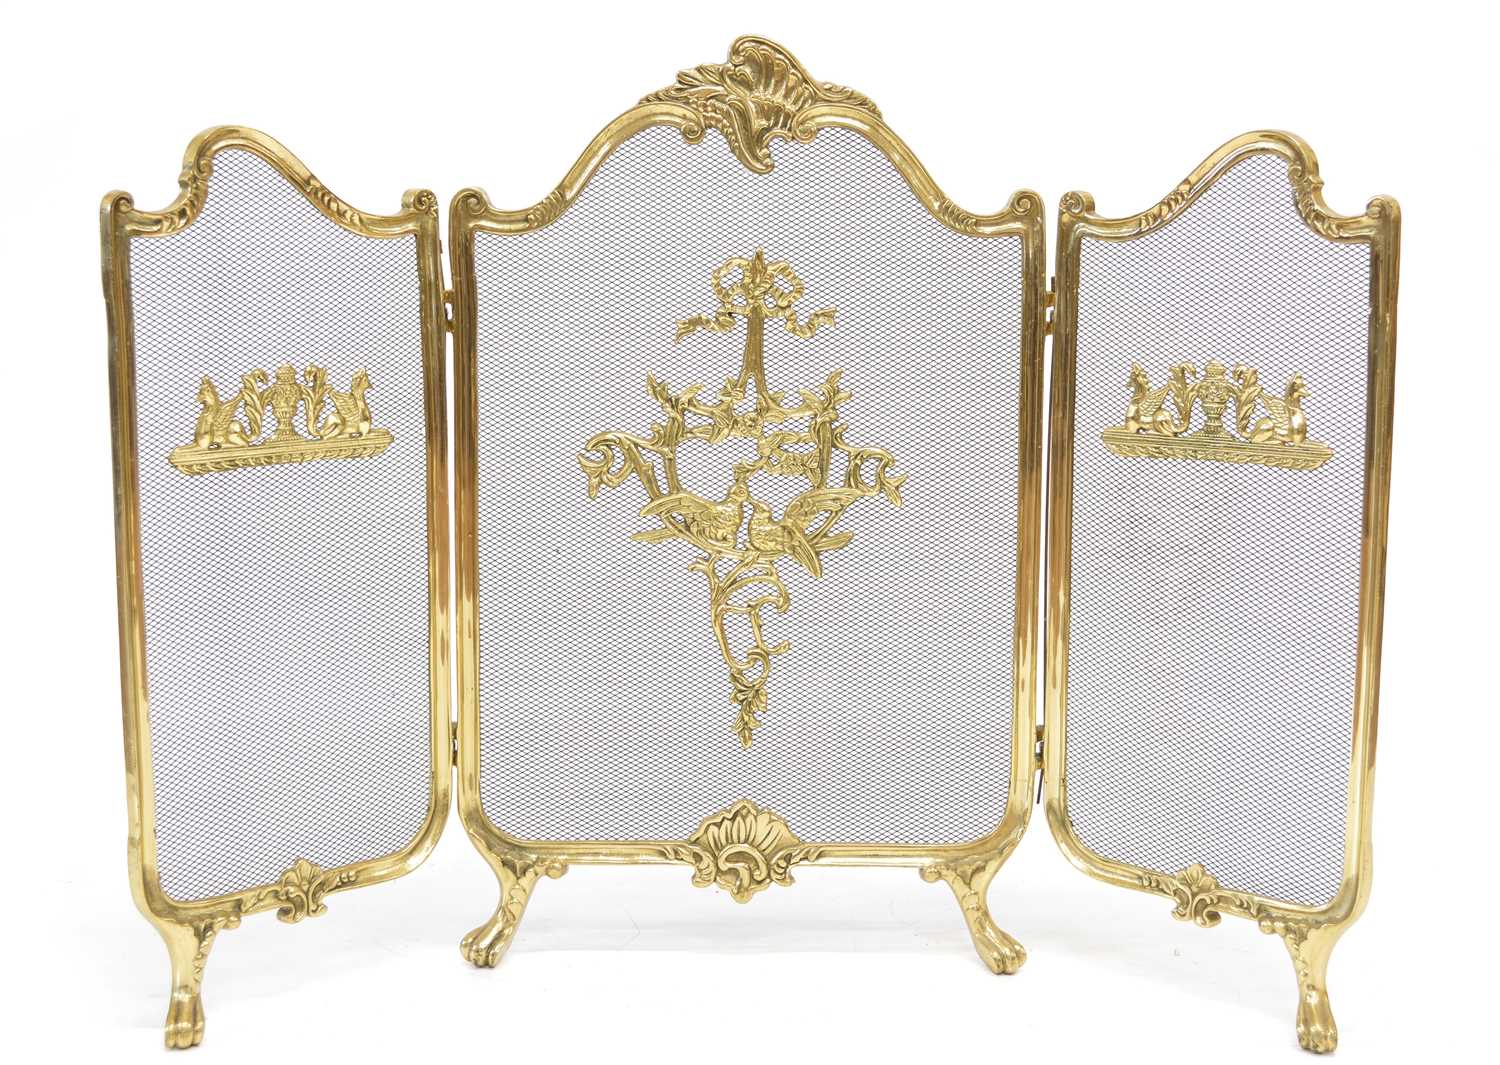 Lot 237 - French Rococo Style Fire Screen